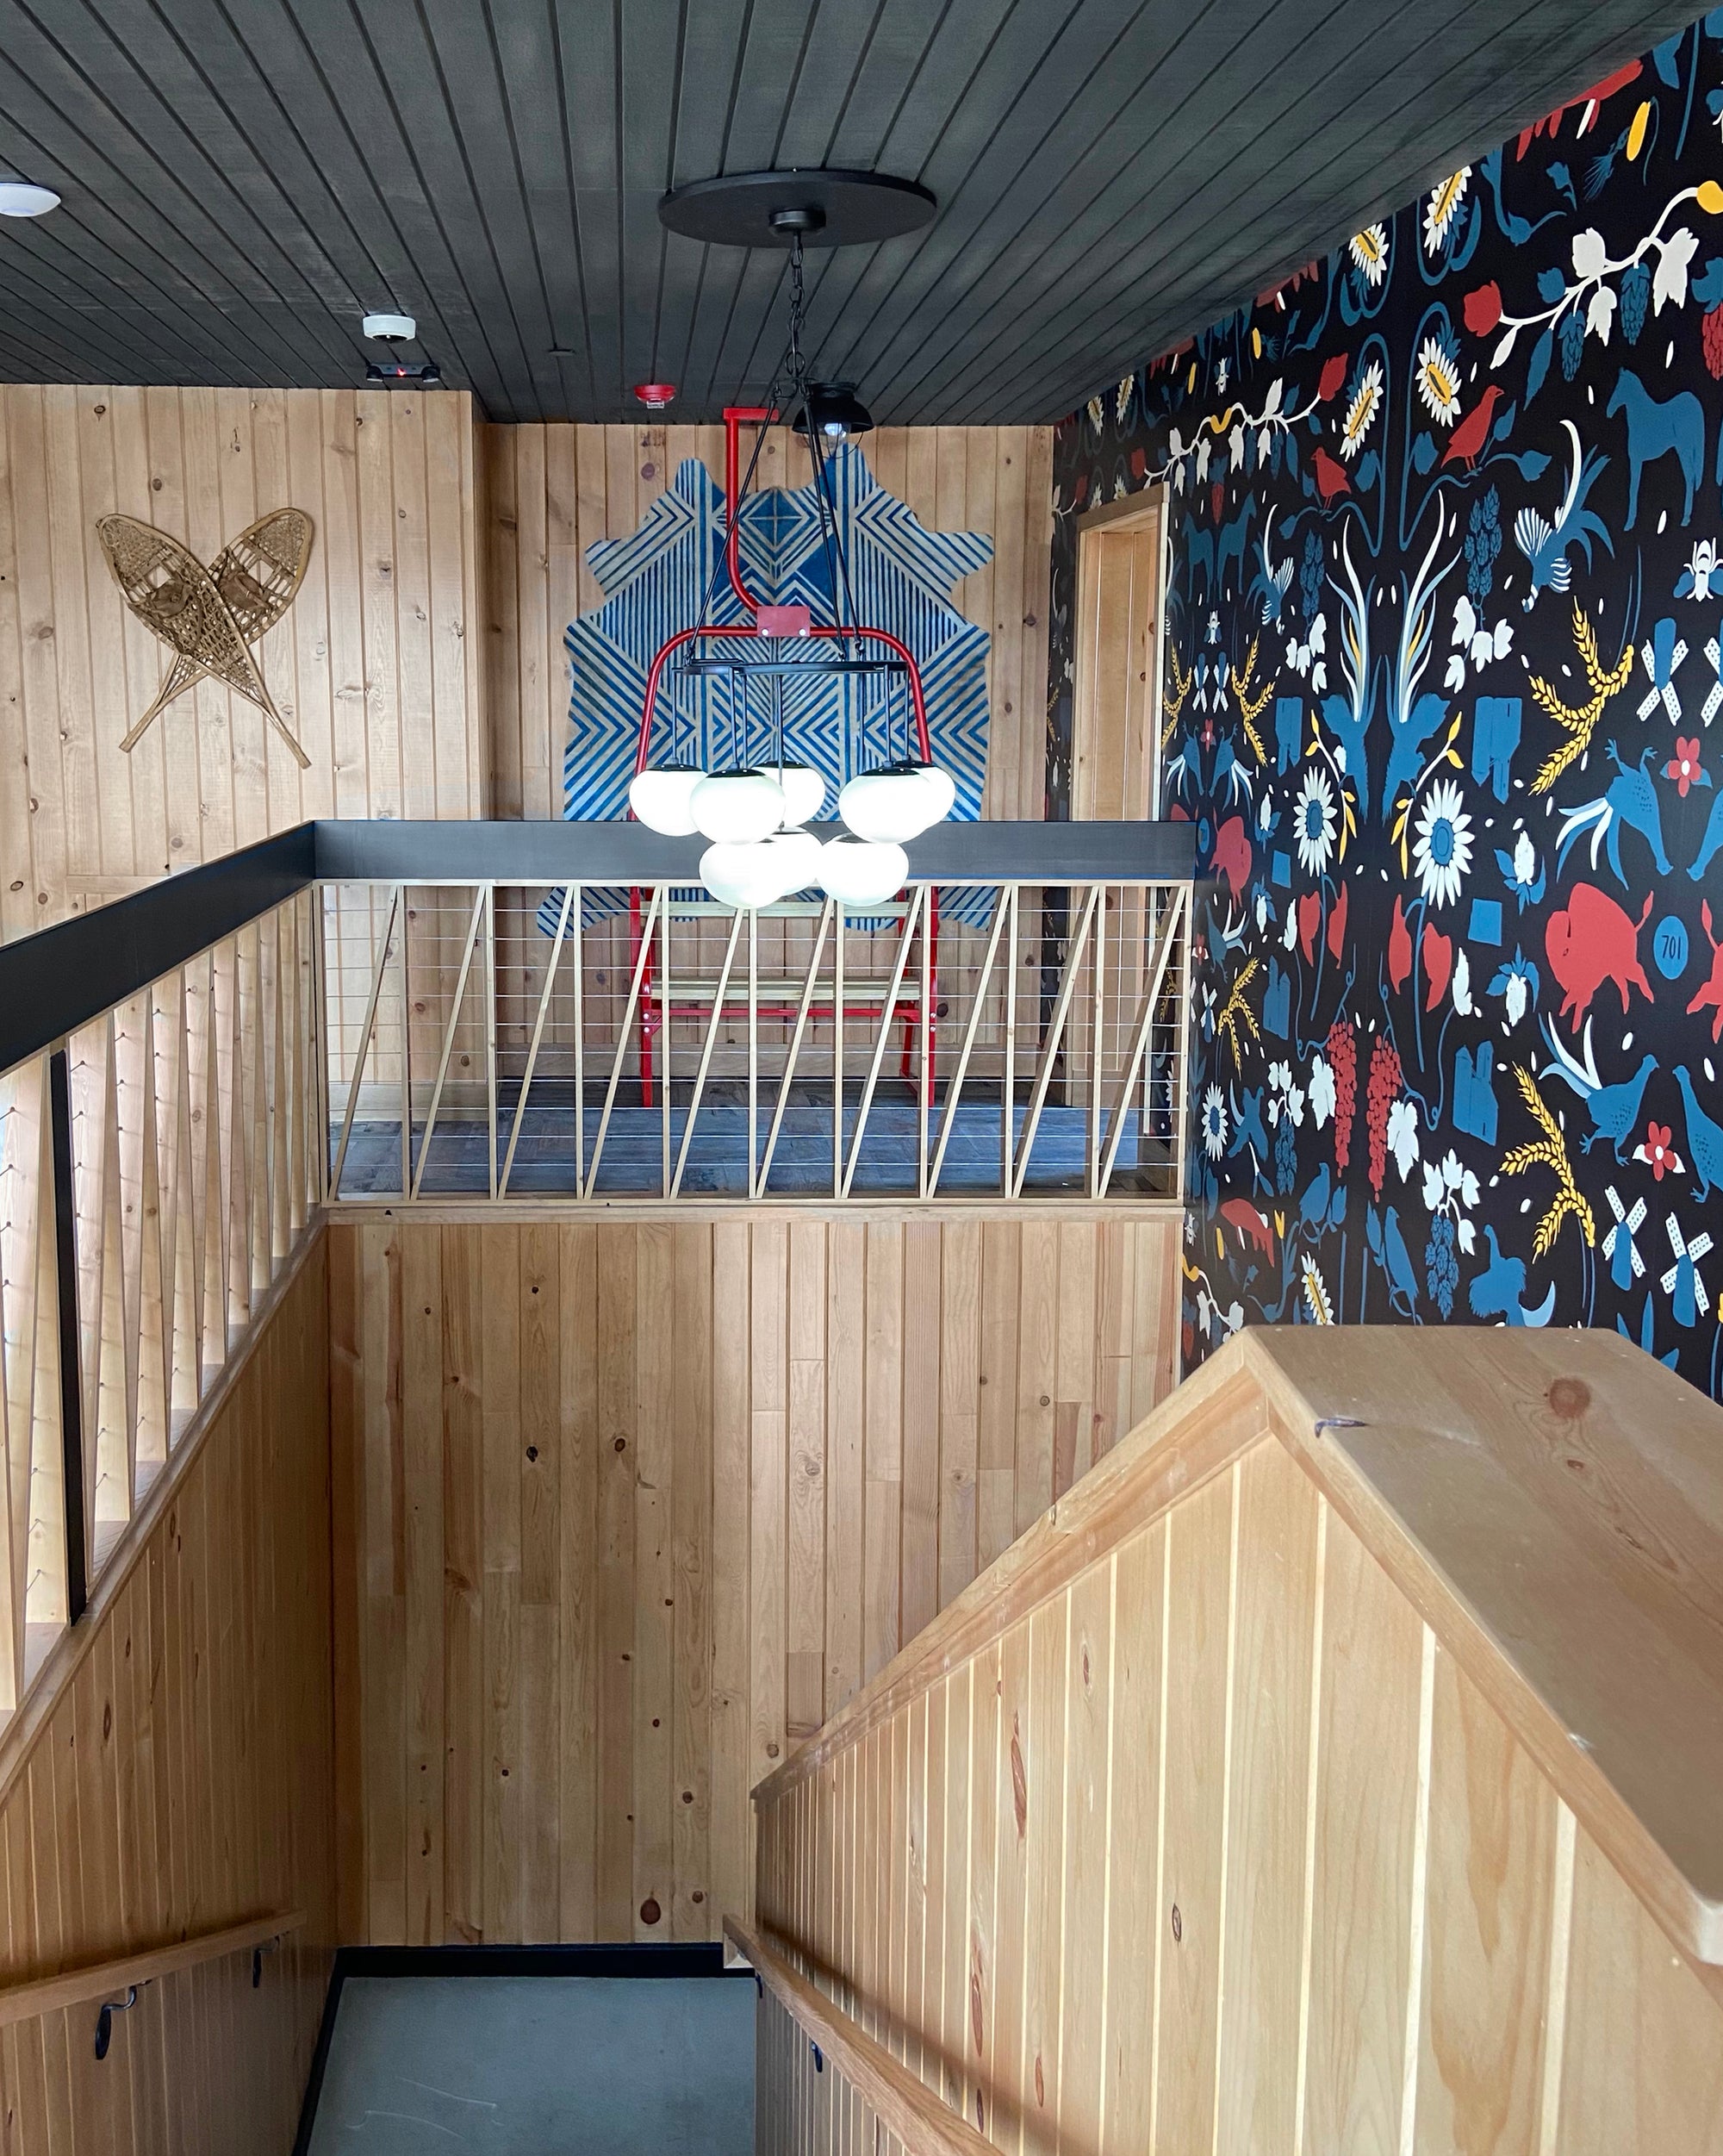 Pine Paneling Stairwell | 701 Eateries in Fargo, ND | Interior Design Fargo | Shiplap Ceiling Paneling | Dakota Timber Company Wood | Sustainable Building Companies | Gray Shiplap Ceiling